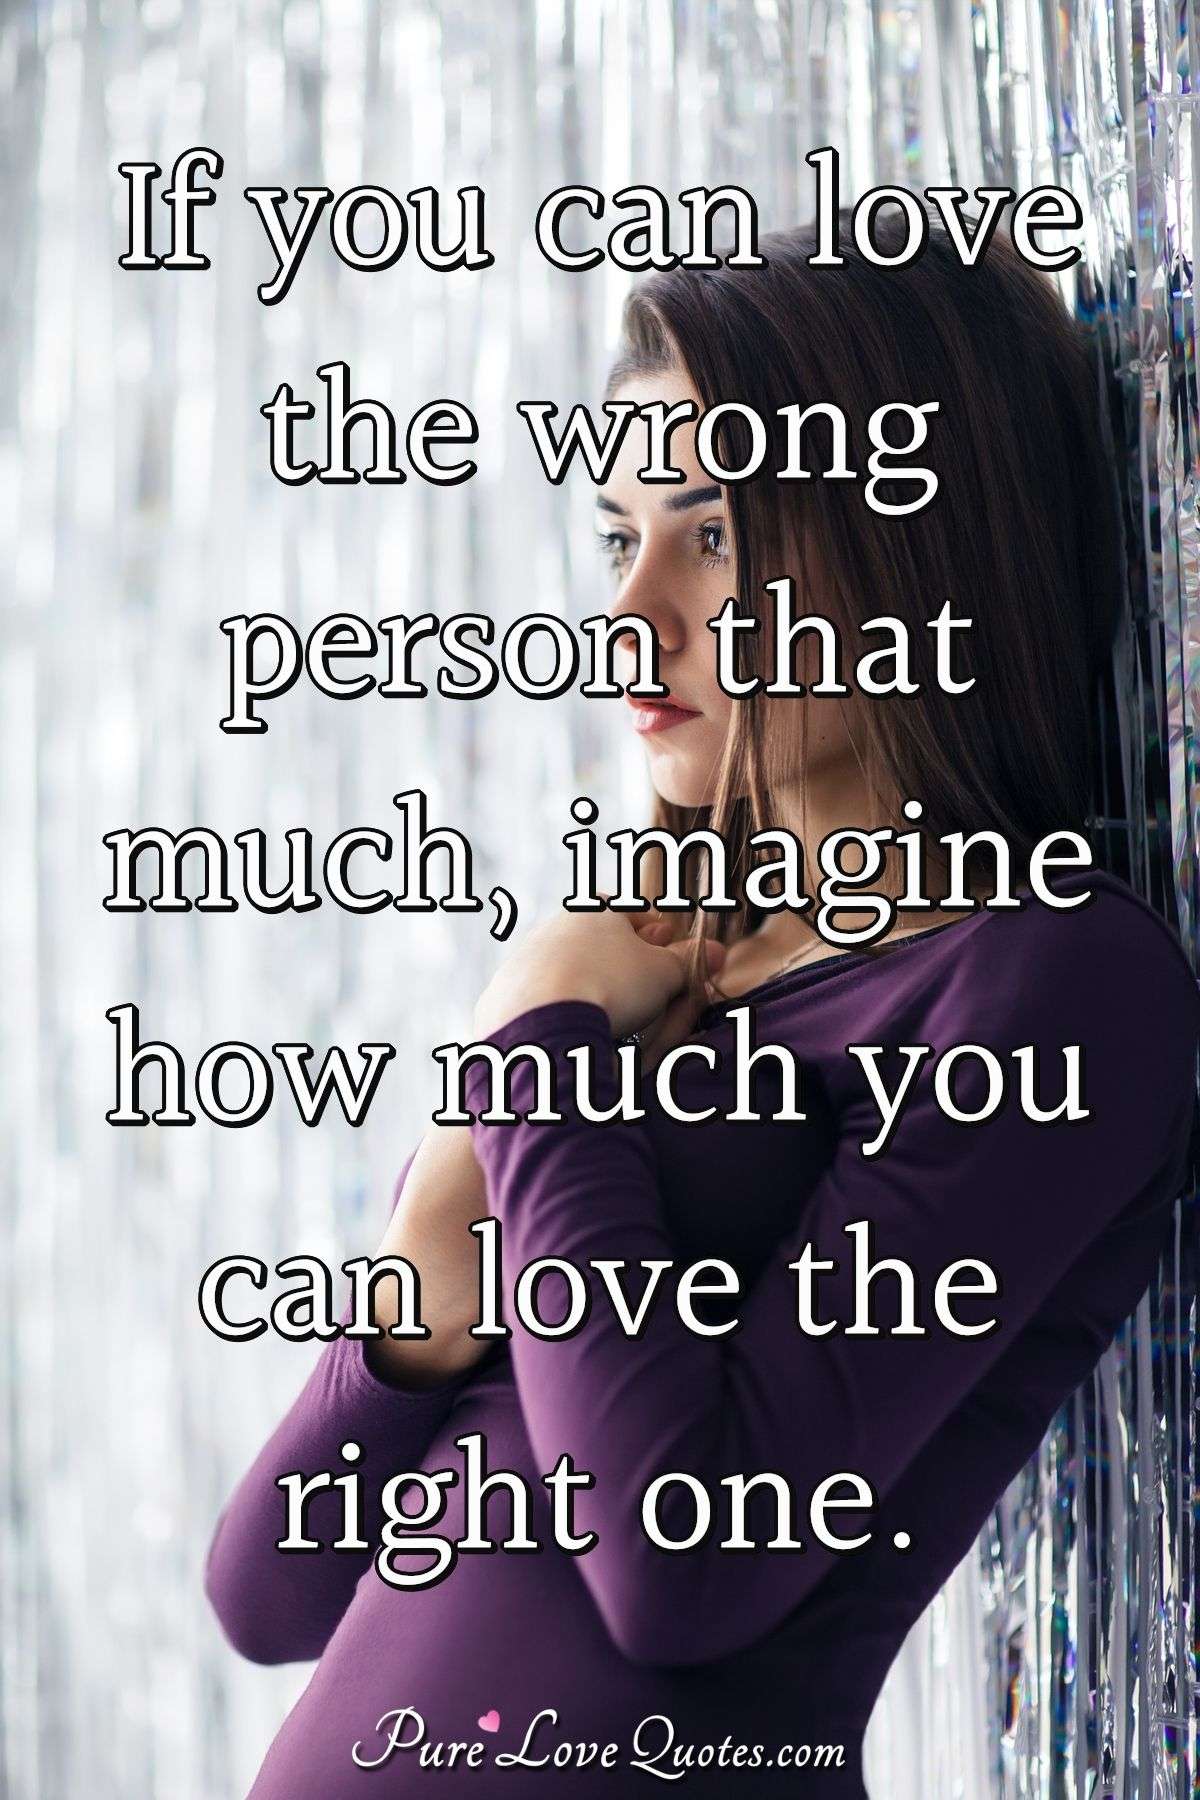 If you can love the wrong person that much, imagine how much you can love the right one. - Anonymous